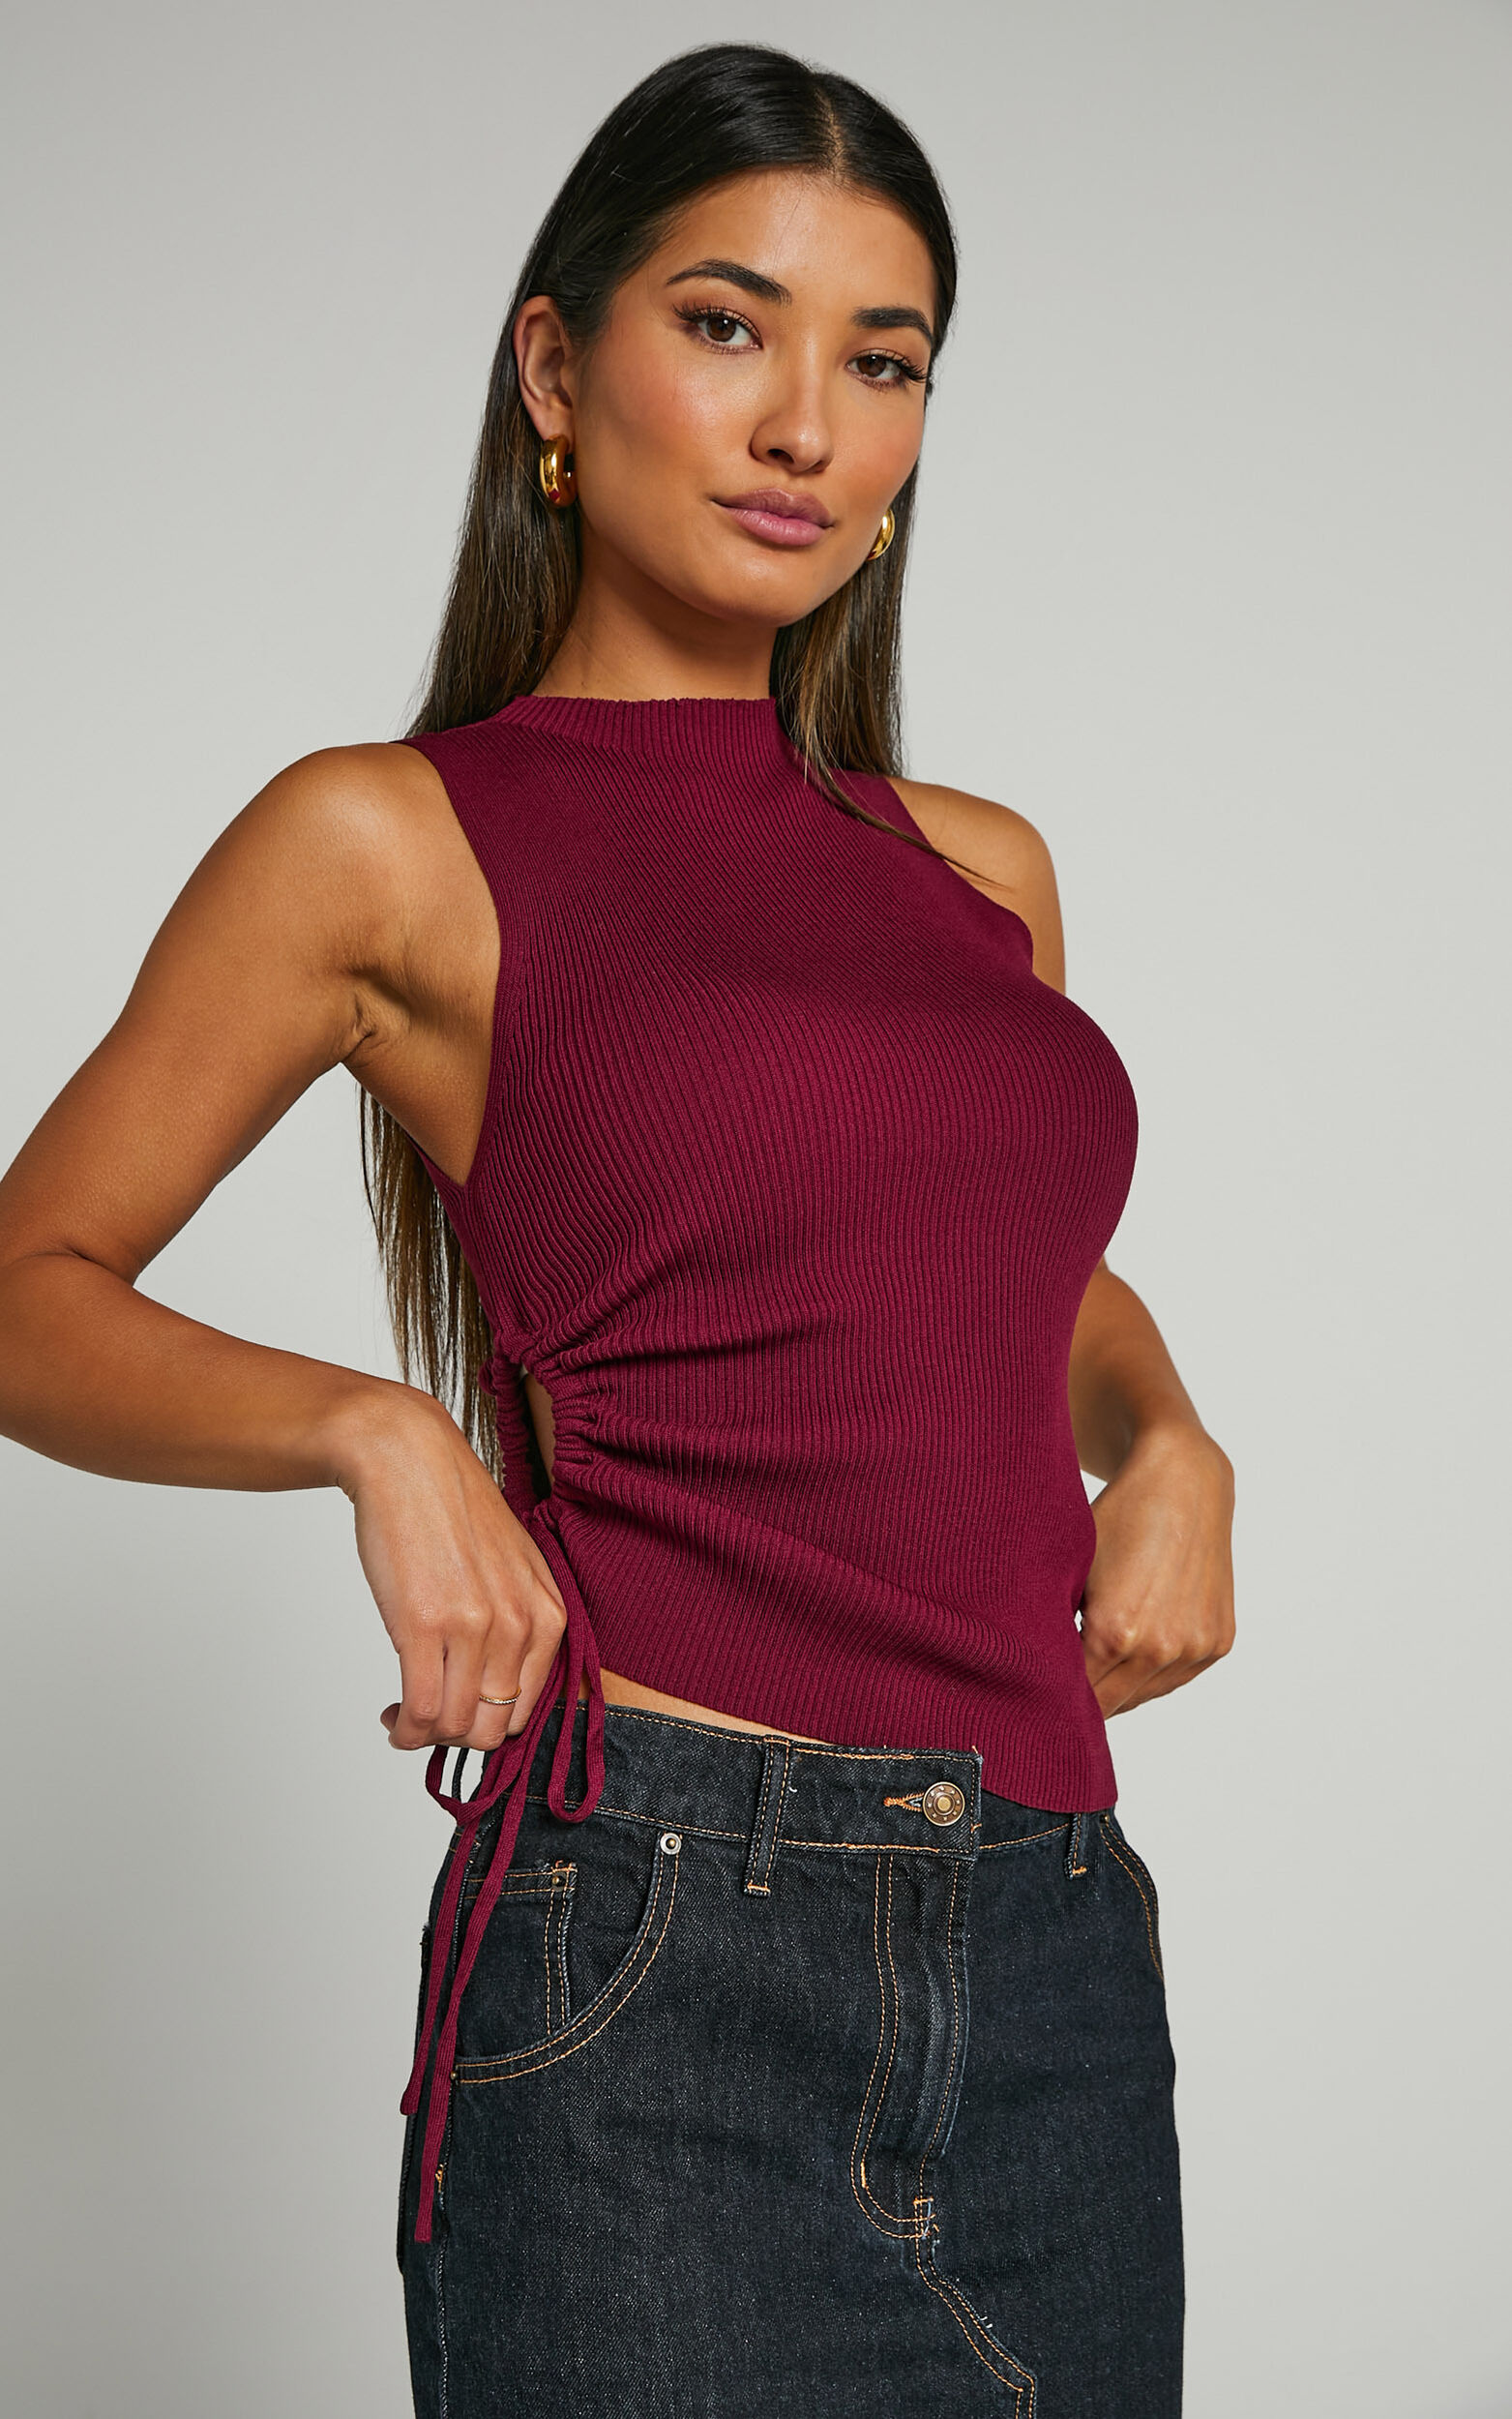 Giselli Top - Knit Ruched Side Tank Top in Plum - 04, PNK1